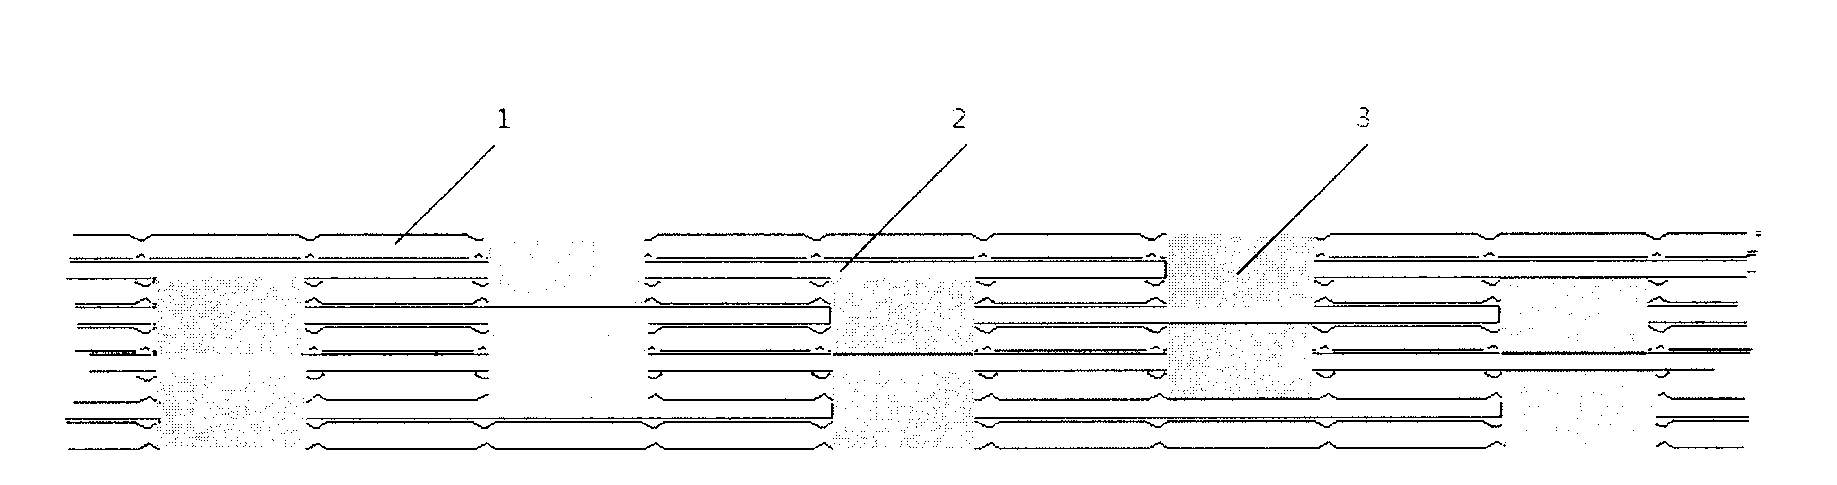 Method for manufacturing honeycomb core with filling material by using textile waste